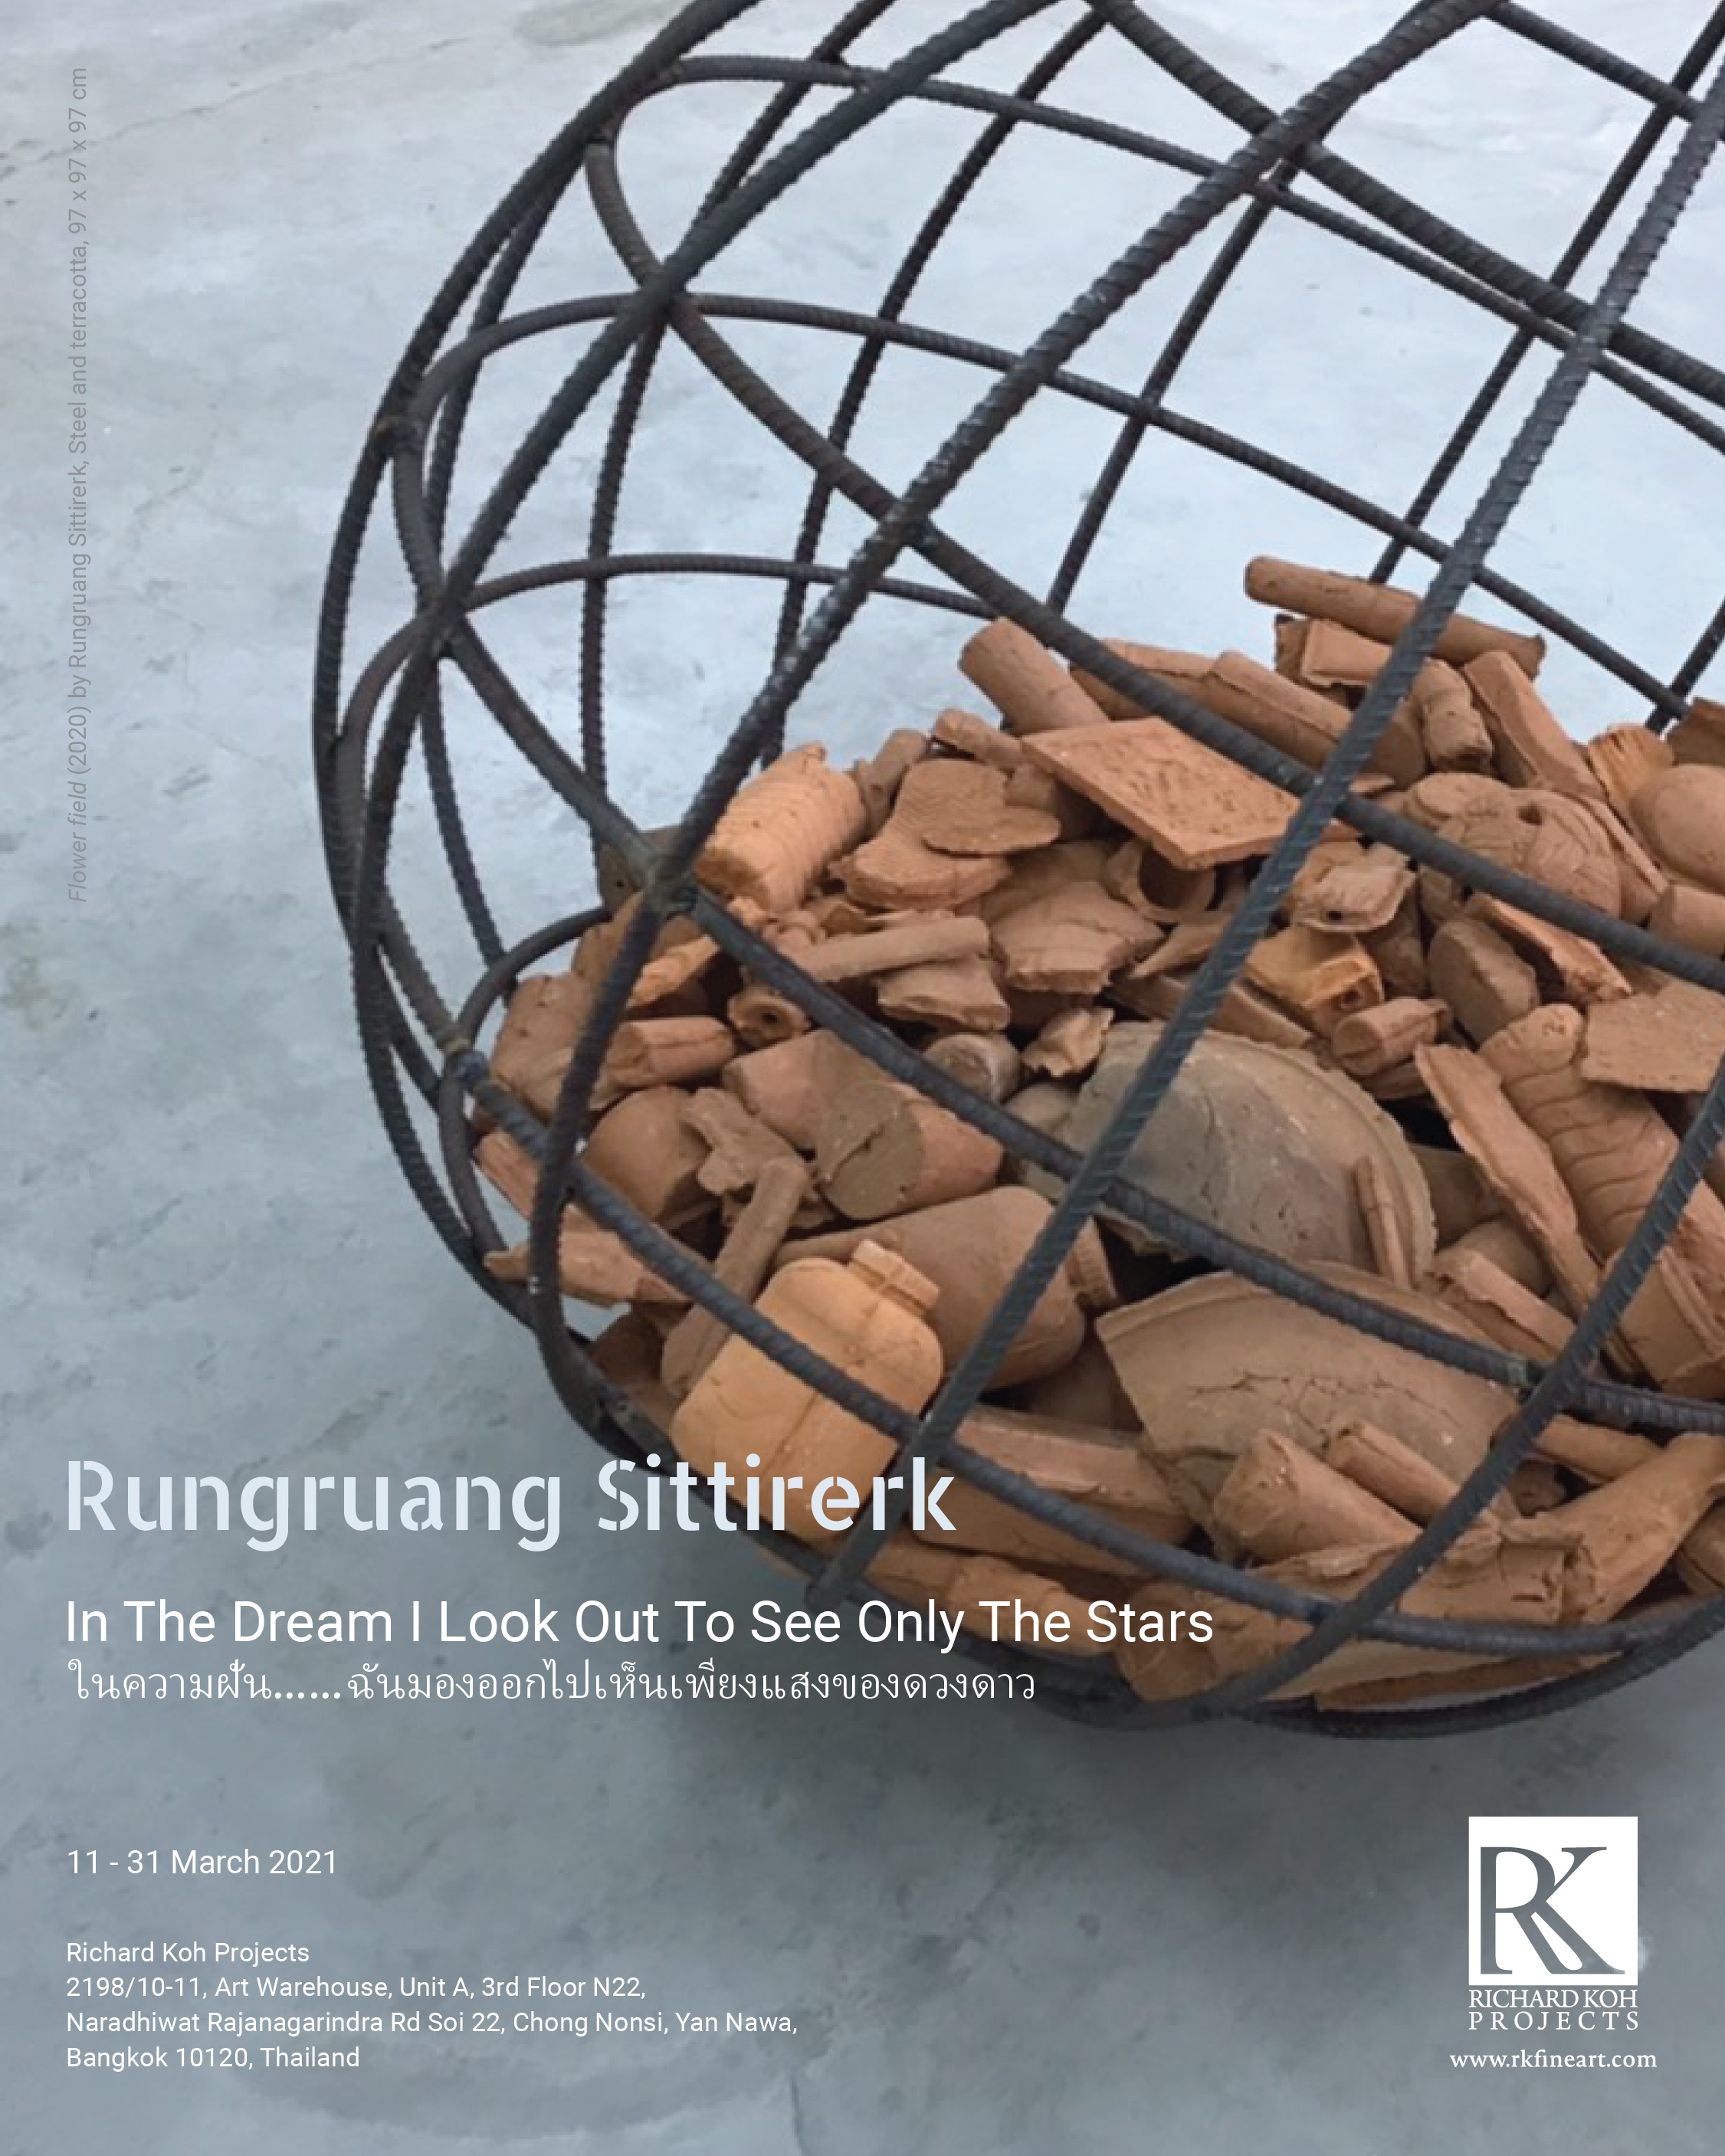   Rungruang Sittirerk – In The Dream I Look Out To See Only The Stars